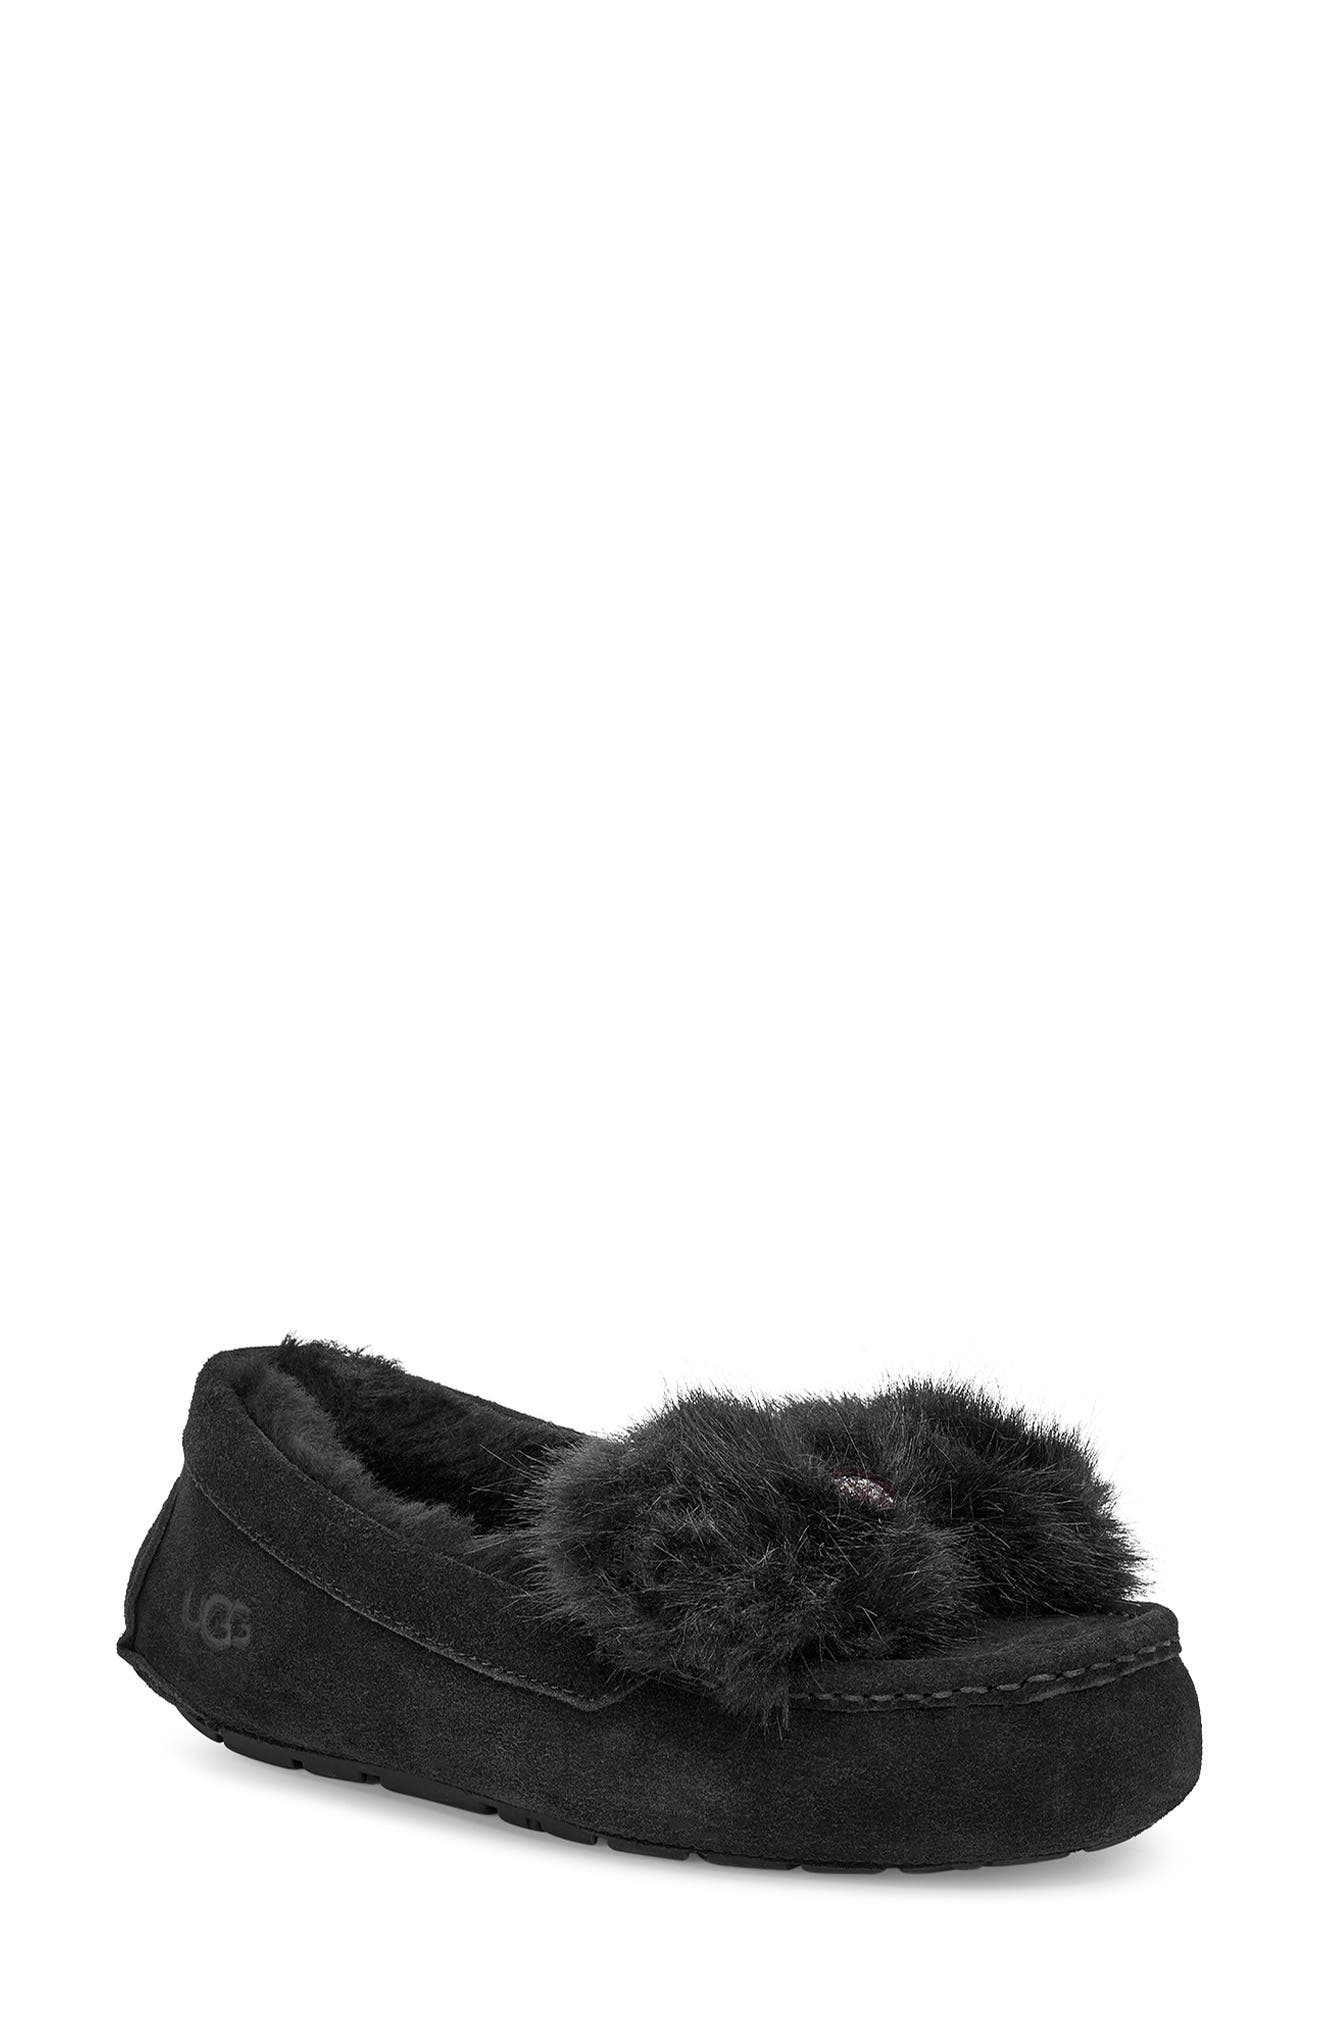 ugg ansley fur bow slippers